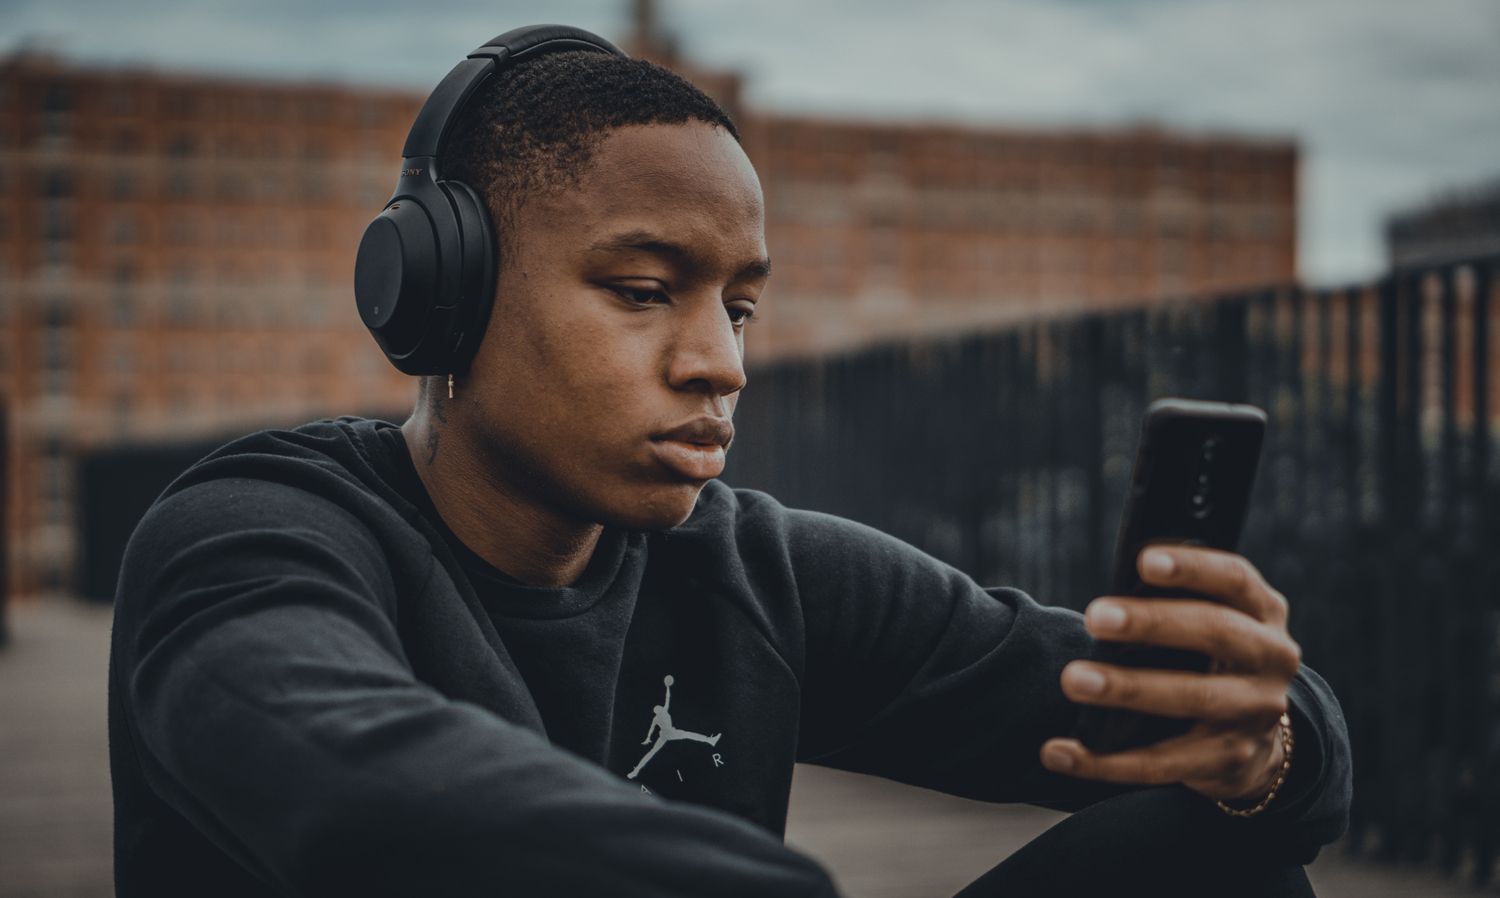 A man looks at his phone while listening to music